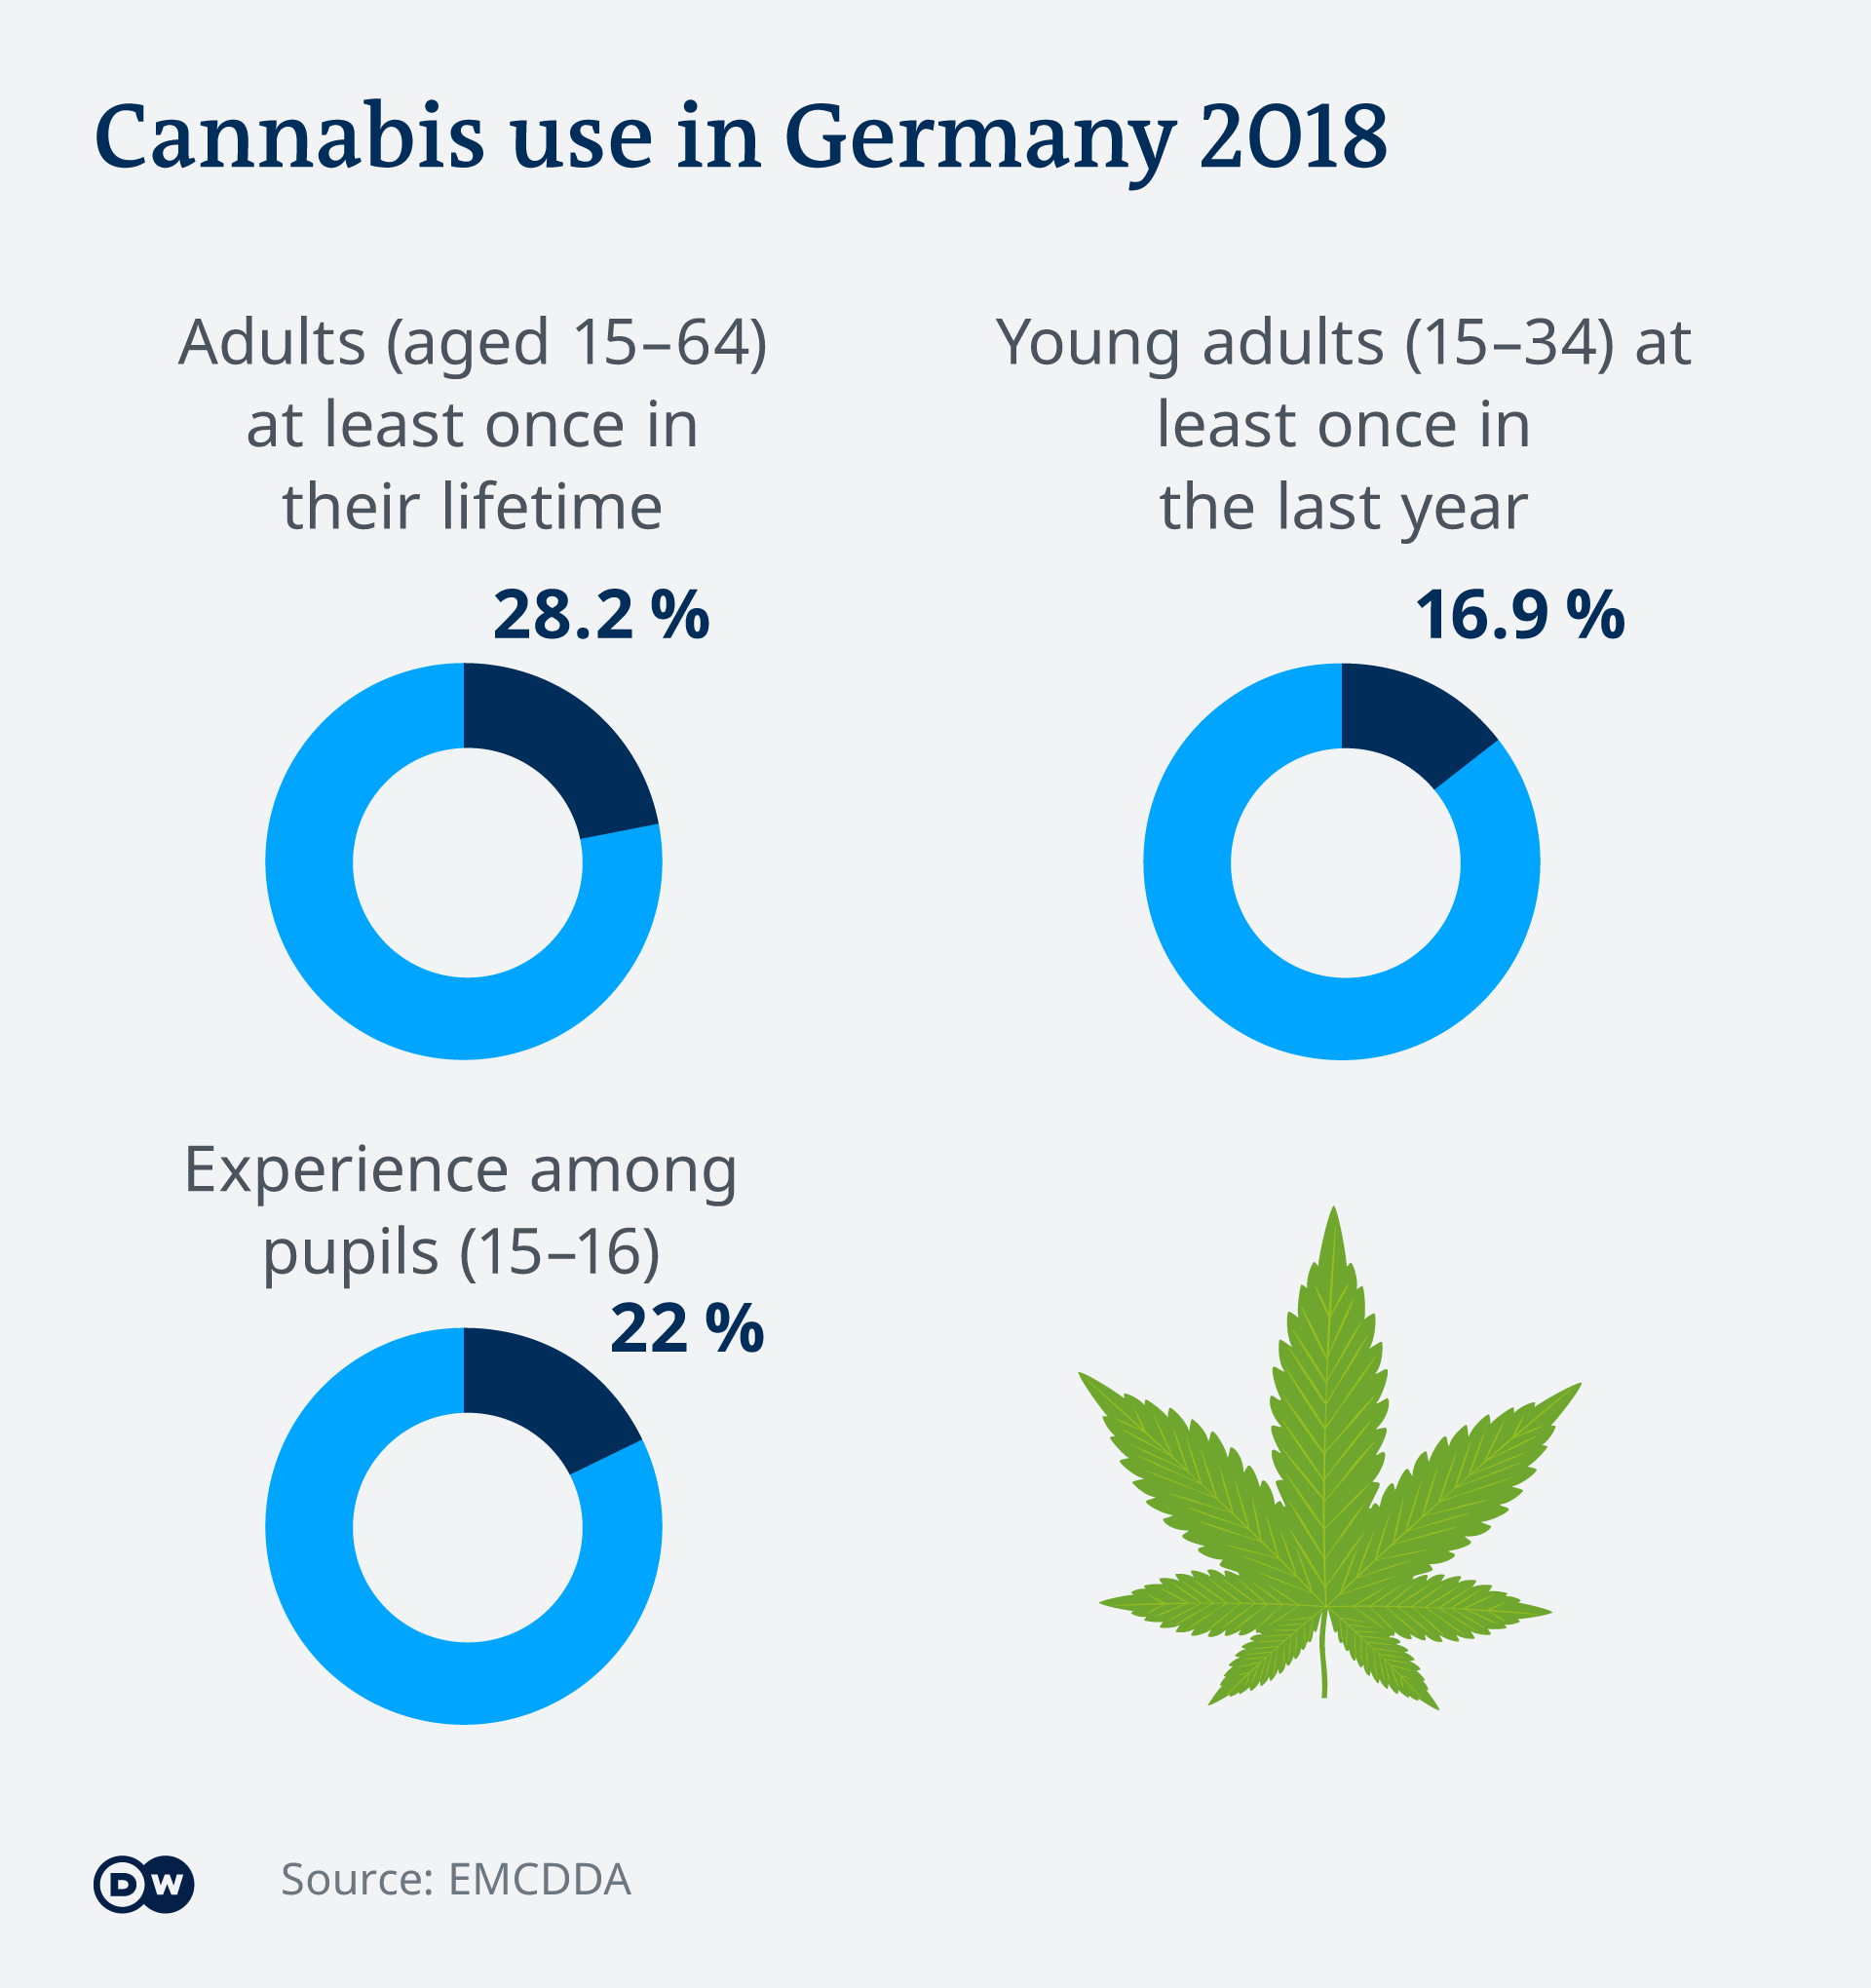 visualization of data showing that many Germans consume cannabis